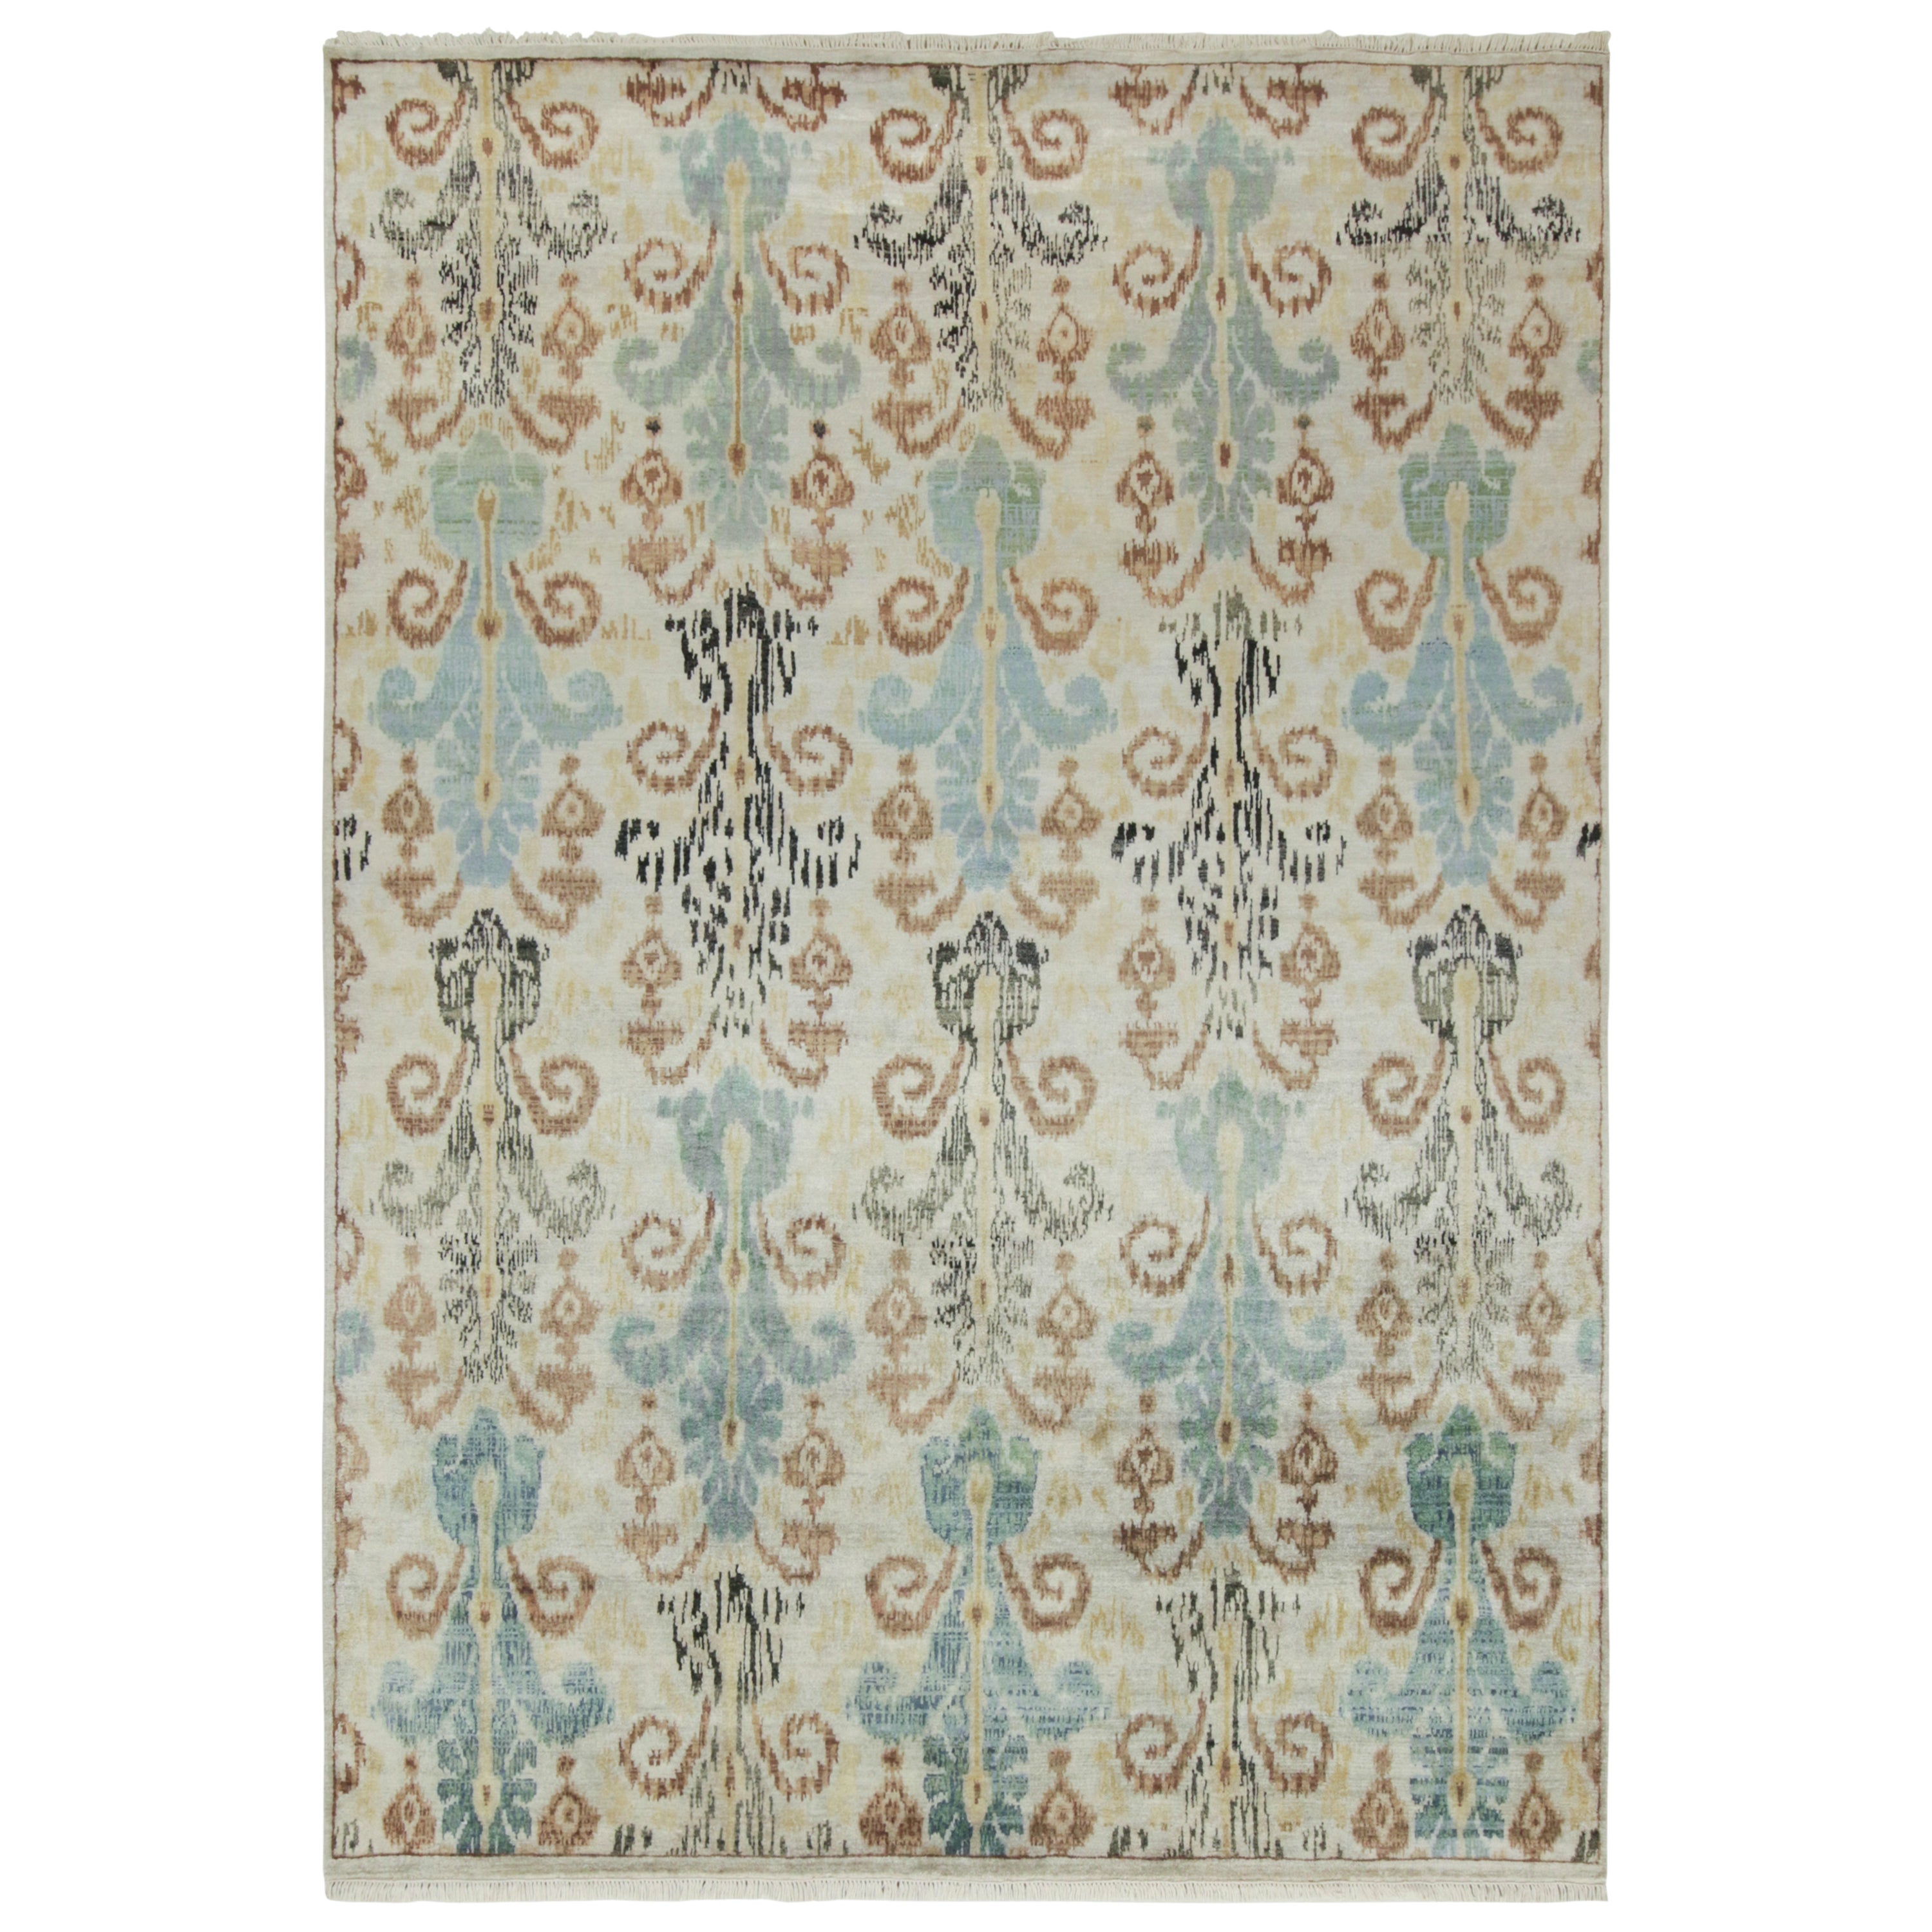 Rug & Kilim’s Classic Ikats Style Rug with Blue, Beige, Brown, Black Patterns For Sale